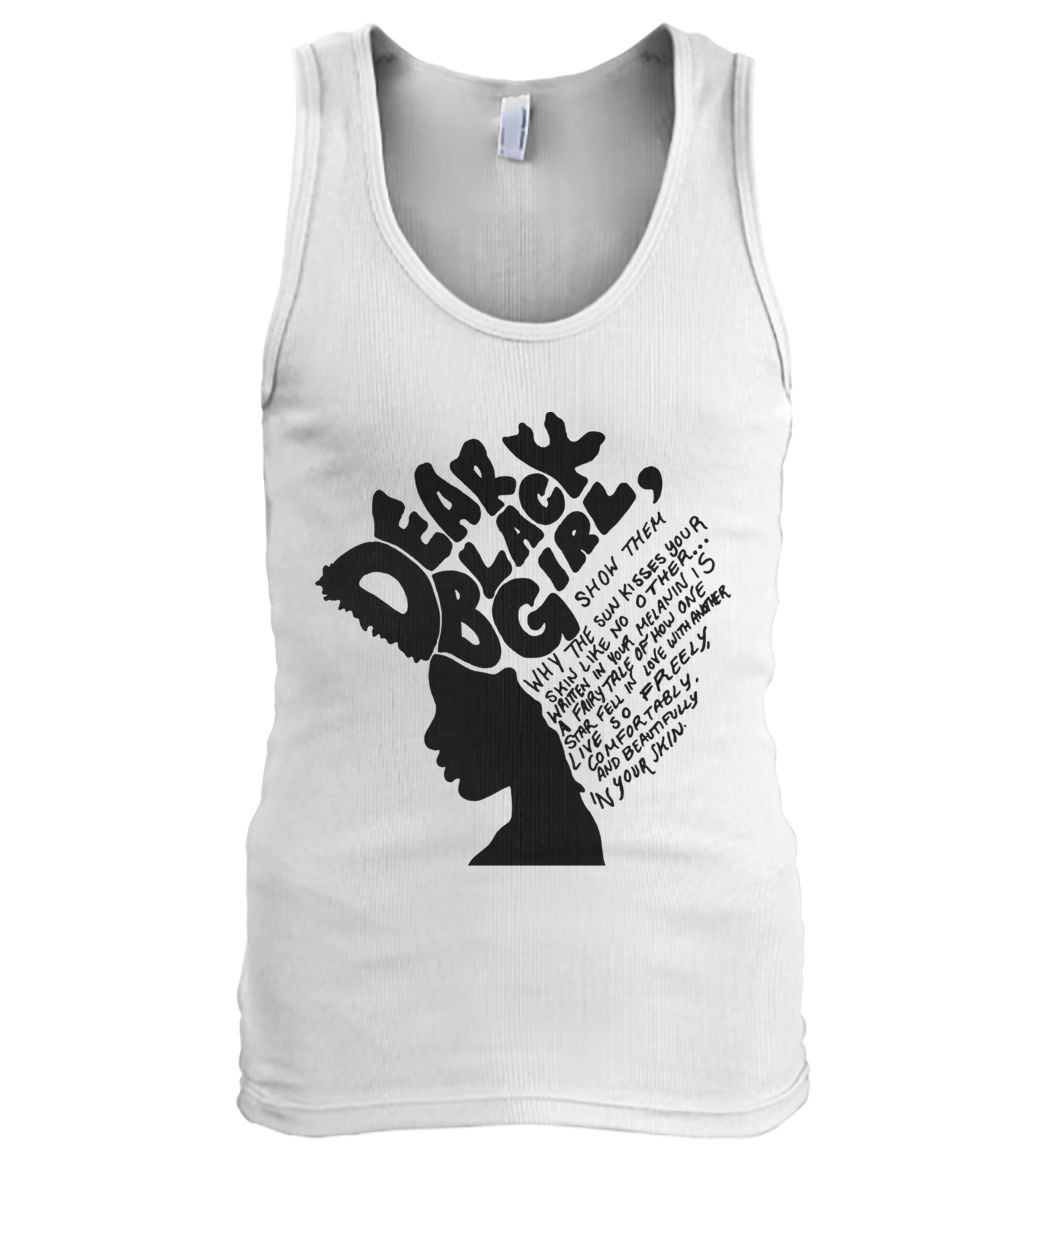 Dear black girl show them why the sun kisses your skin like no other men's tank top